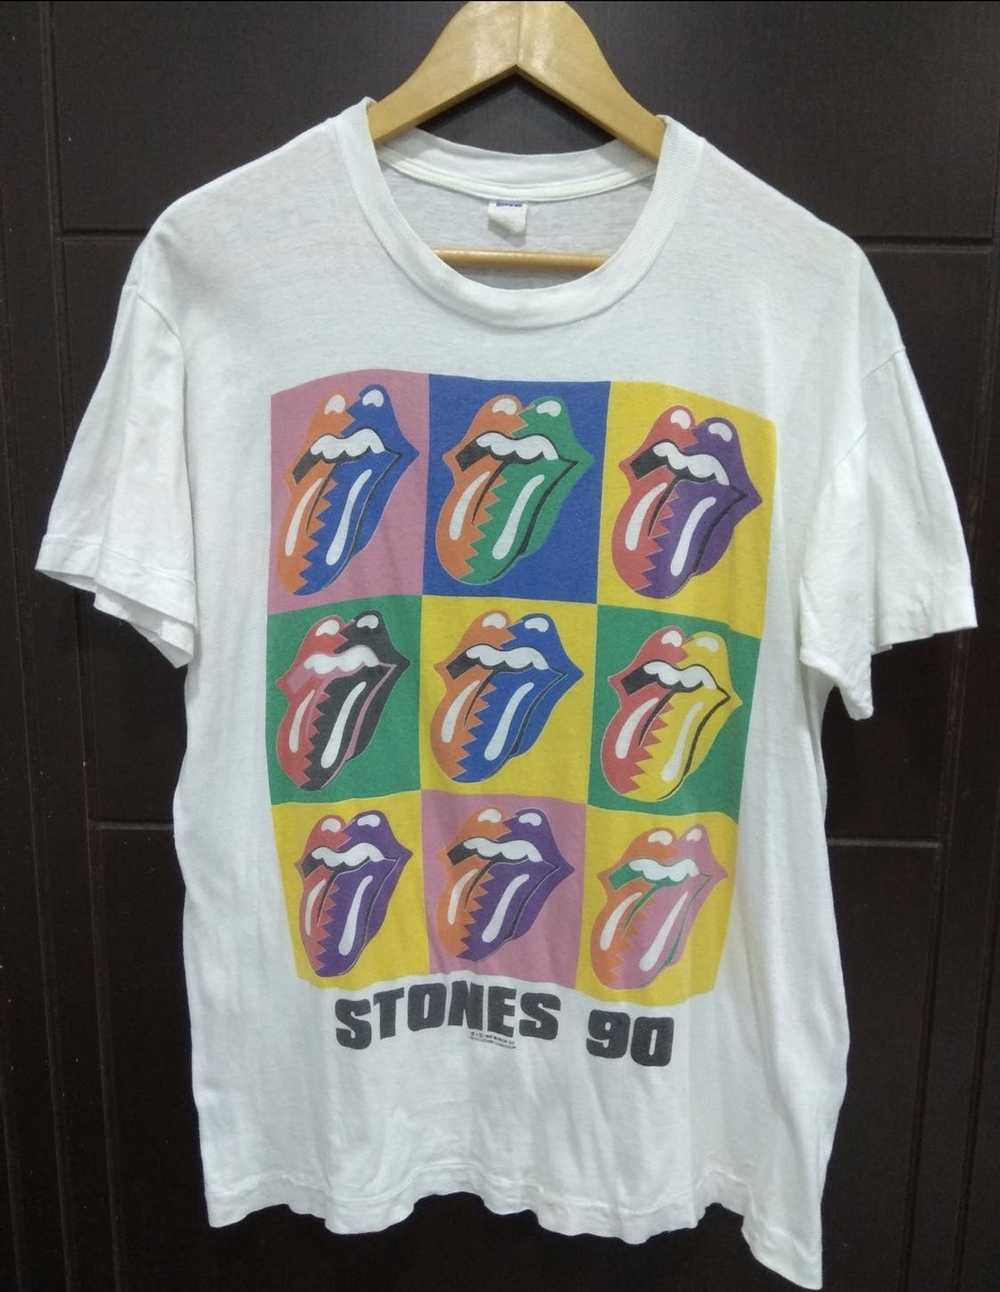 Band Tees × The Rolling Stones × Tour Tee Super r… - image 1